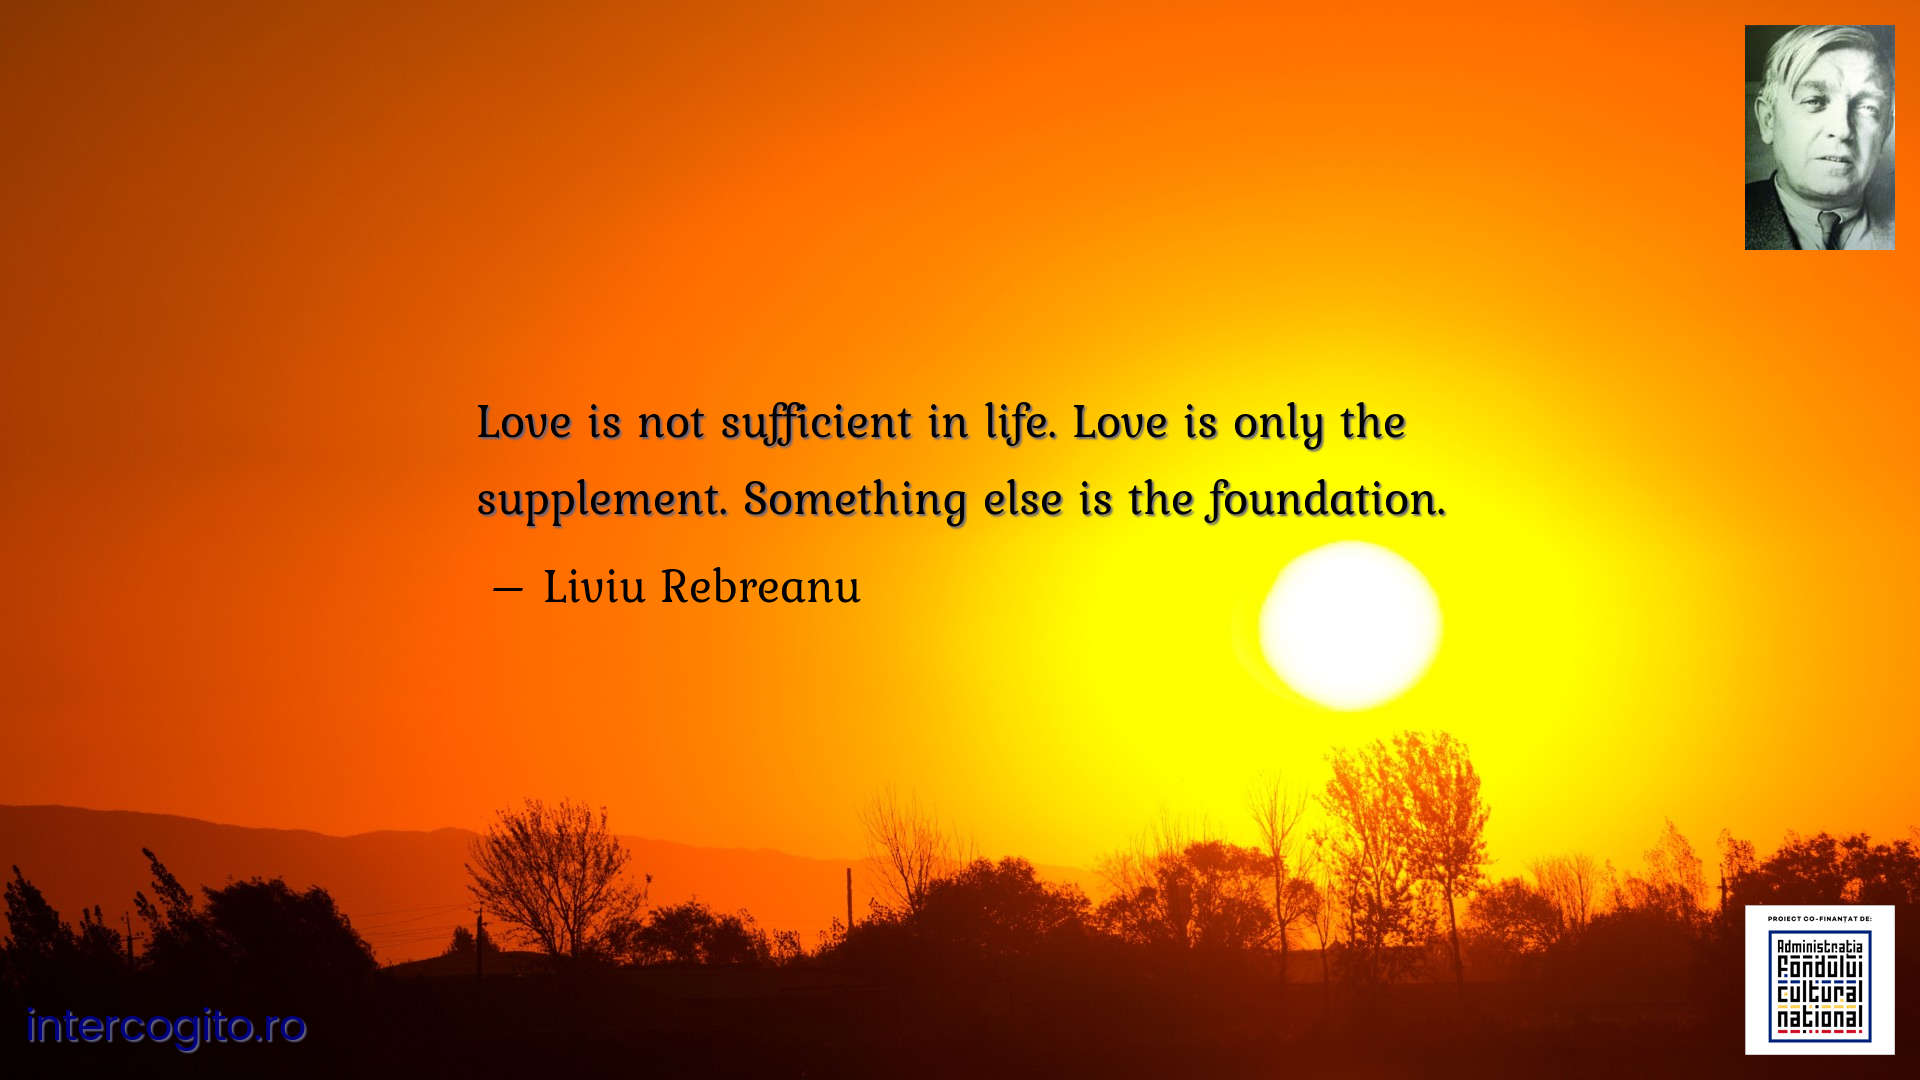 Love is not sufficient in life. Love is only the supplement. Something else is the foundation.